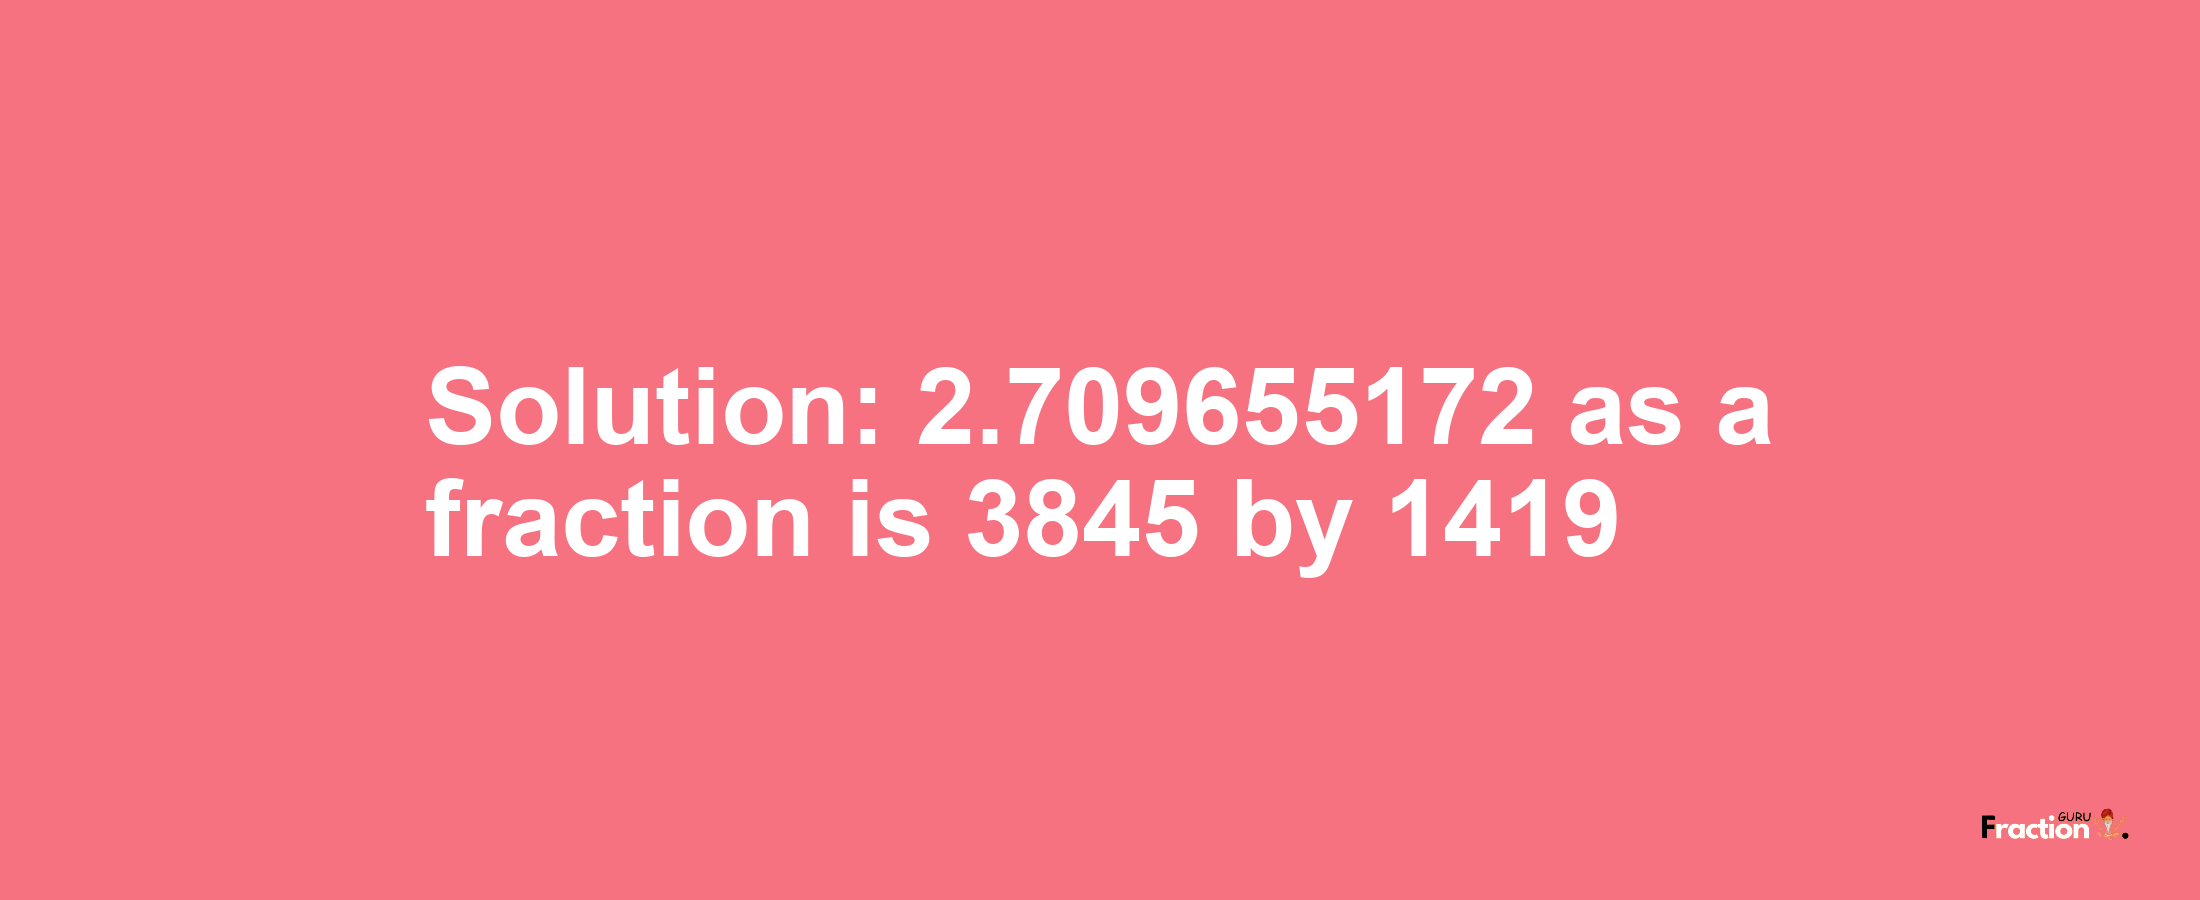 Solution:2.709655172 as a fraction is 3845/1419